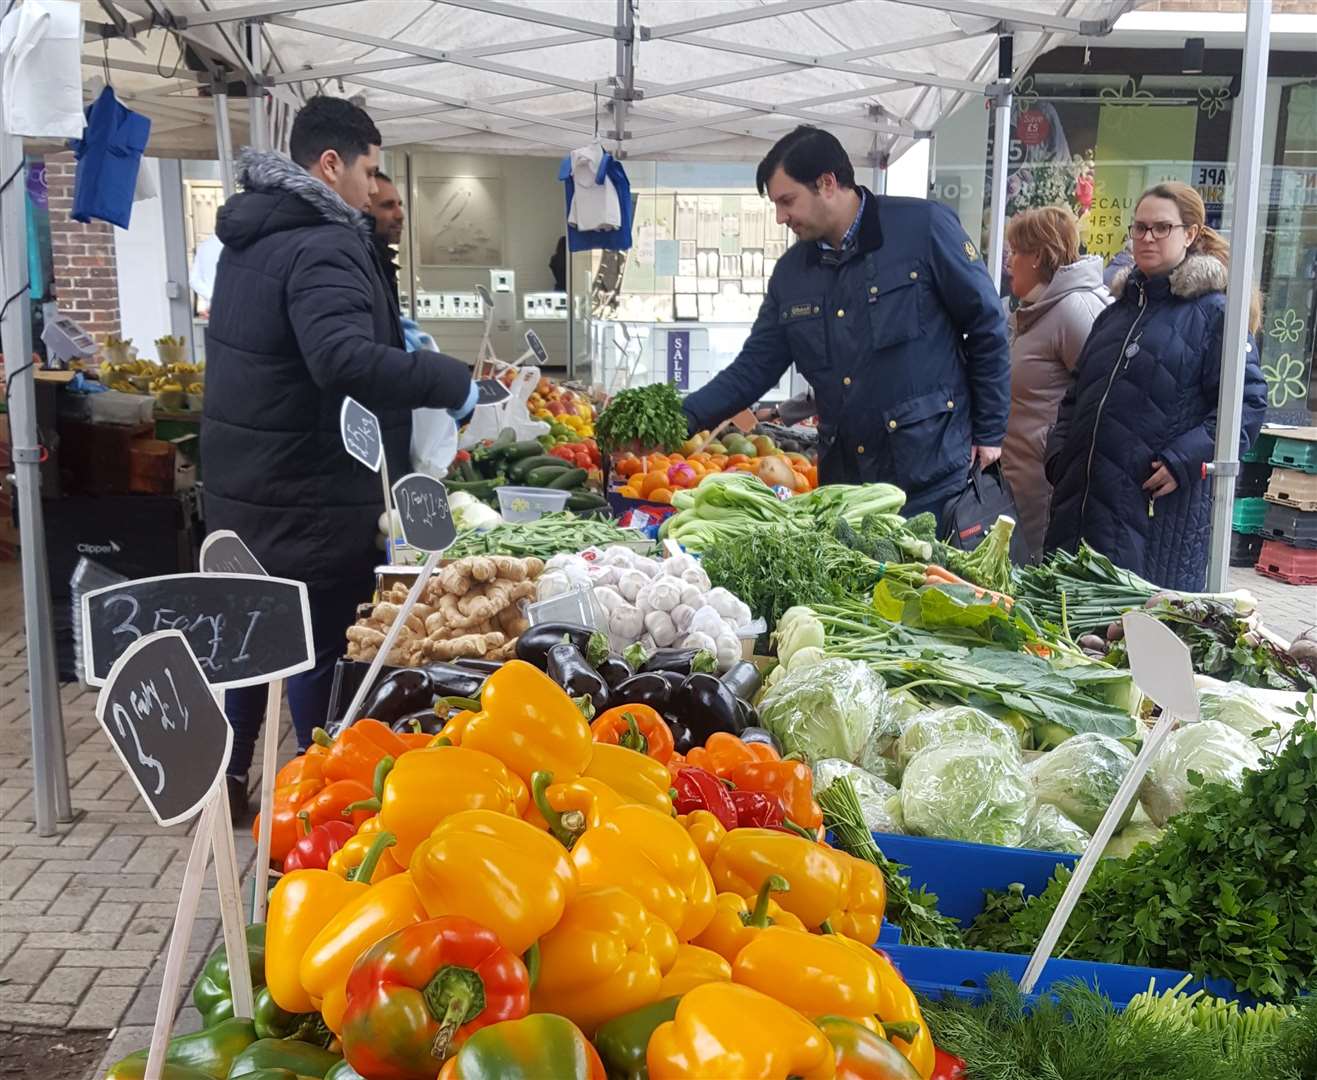 Canterbury market will be disbanded next January